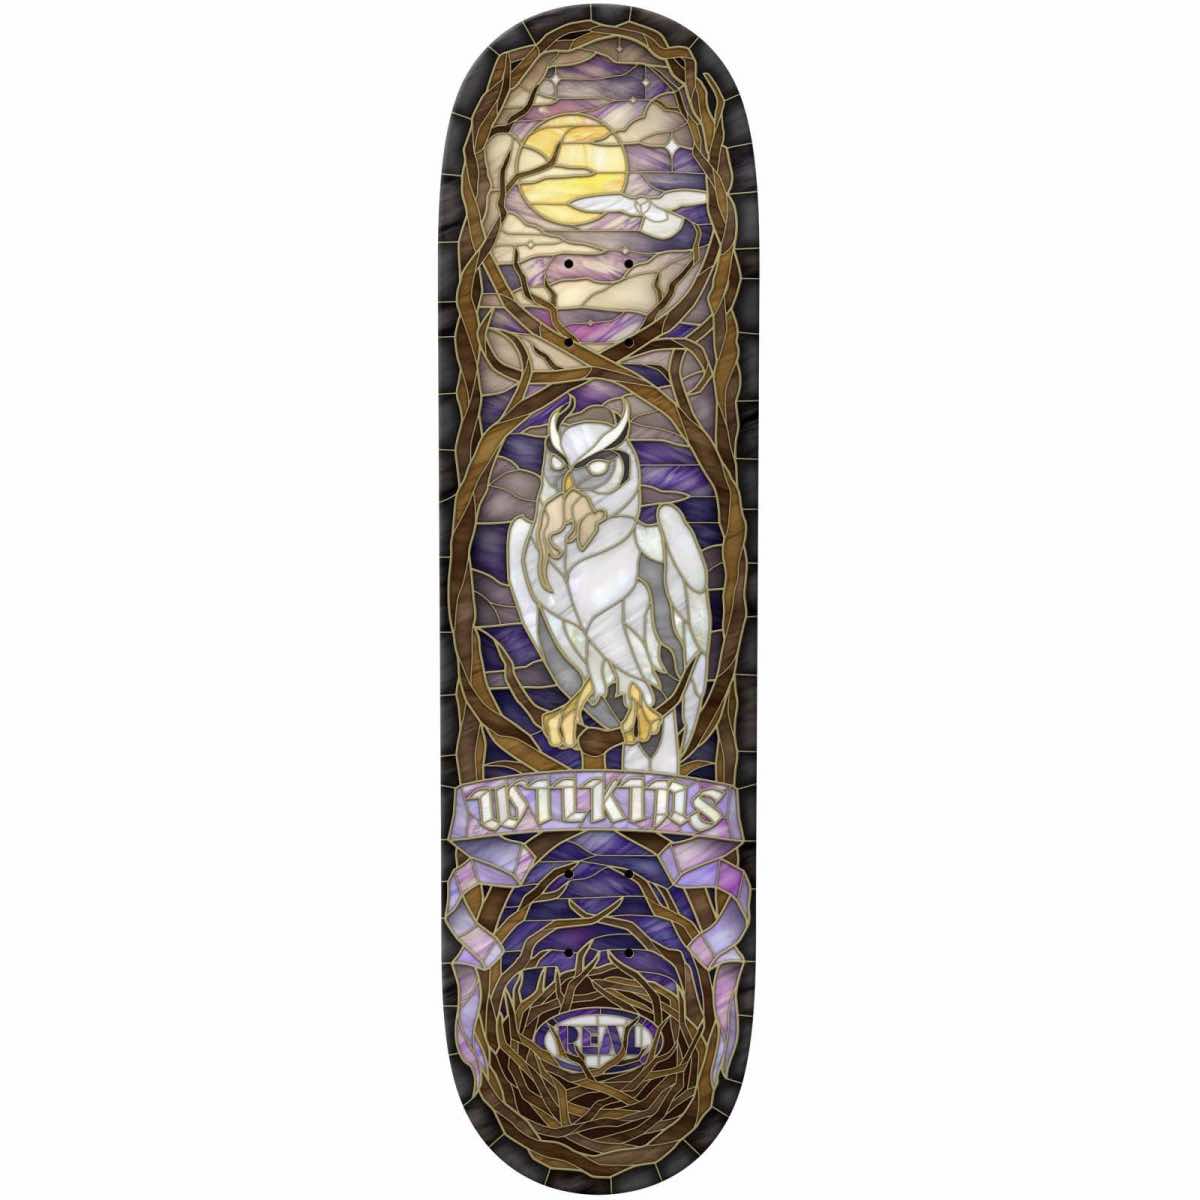 REAL DECK JIMMY WILKINS CATHEDRAL (8.5")